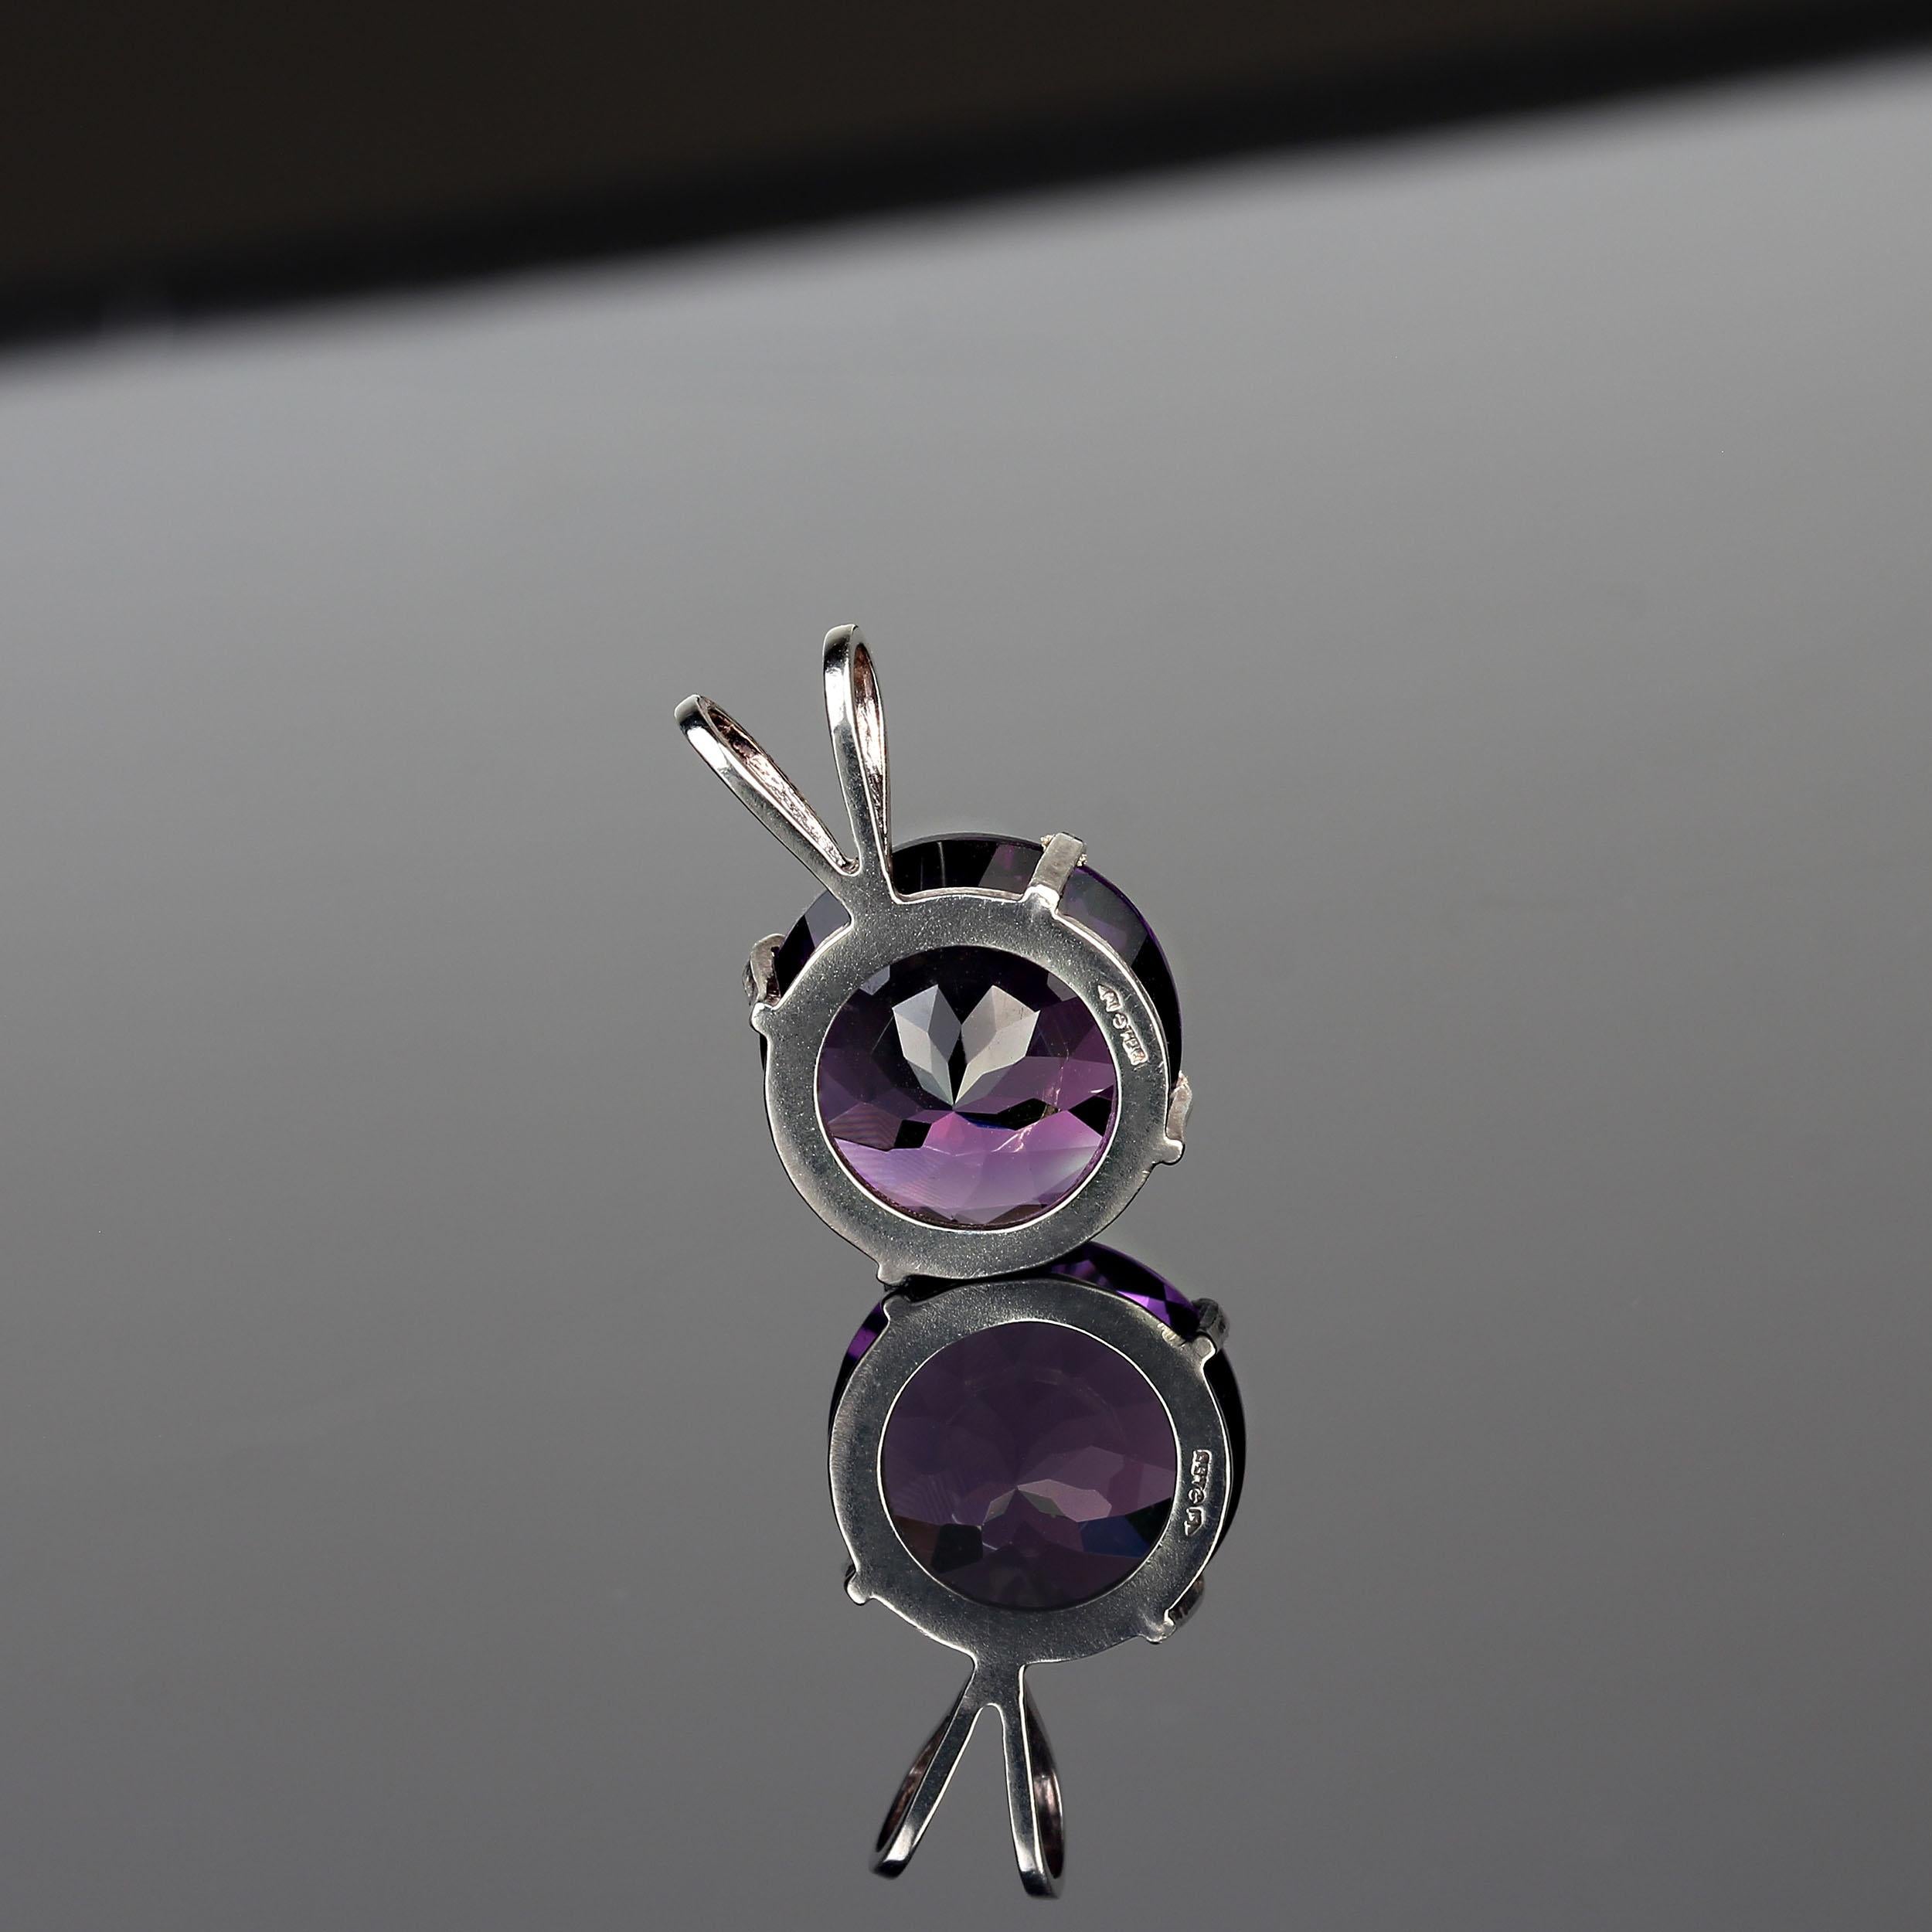 Artisan AJD Sparkling Awesome Amethyst Sterling Silver Pendant February Birthstone!